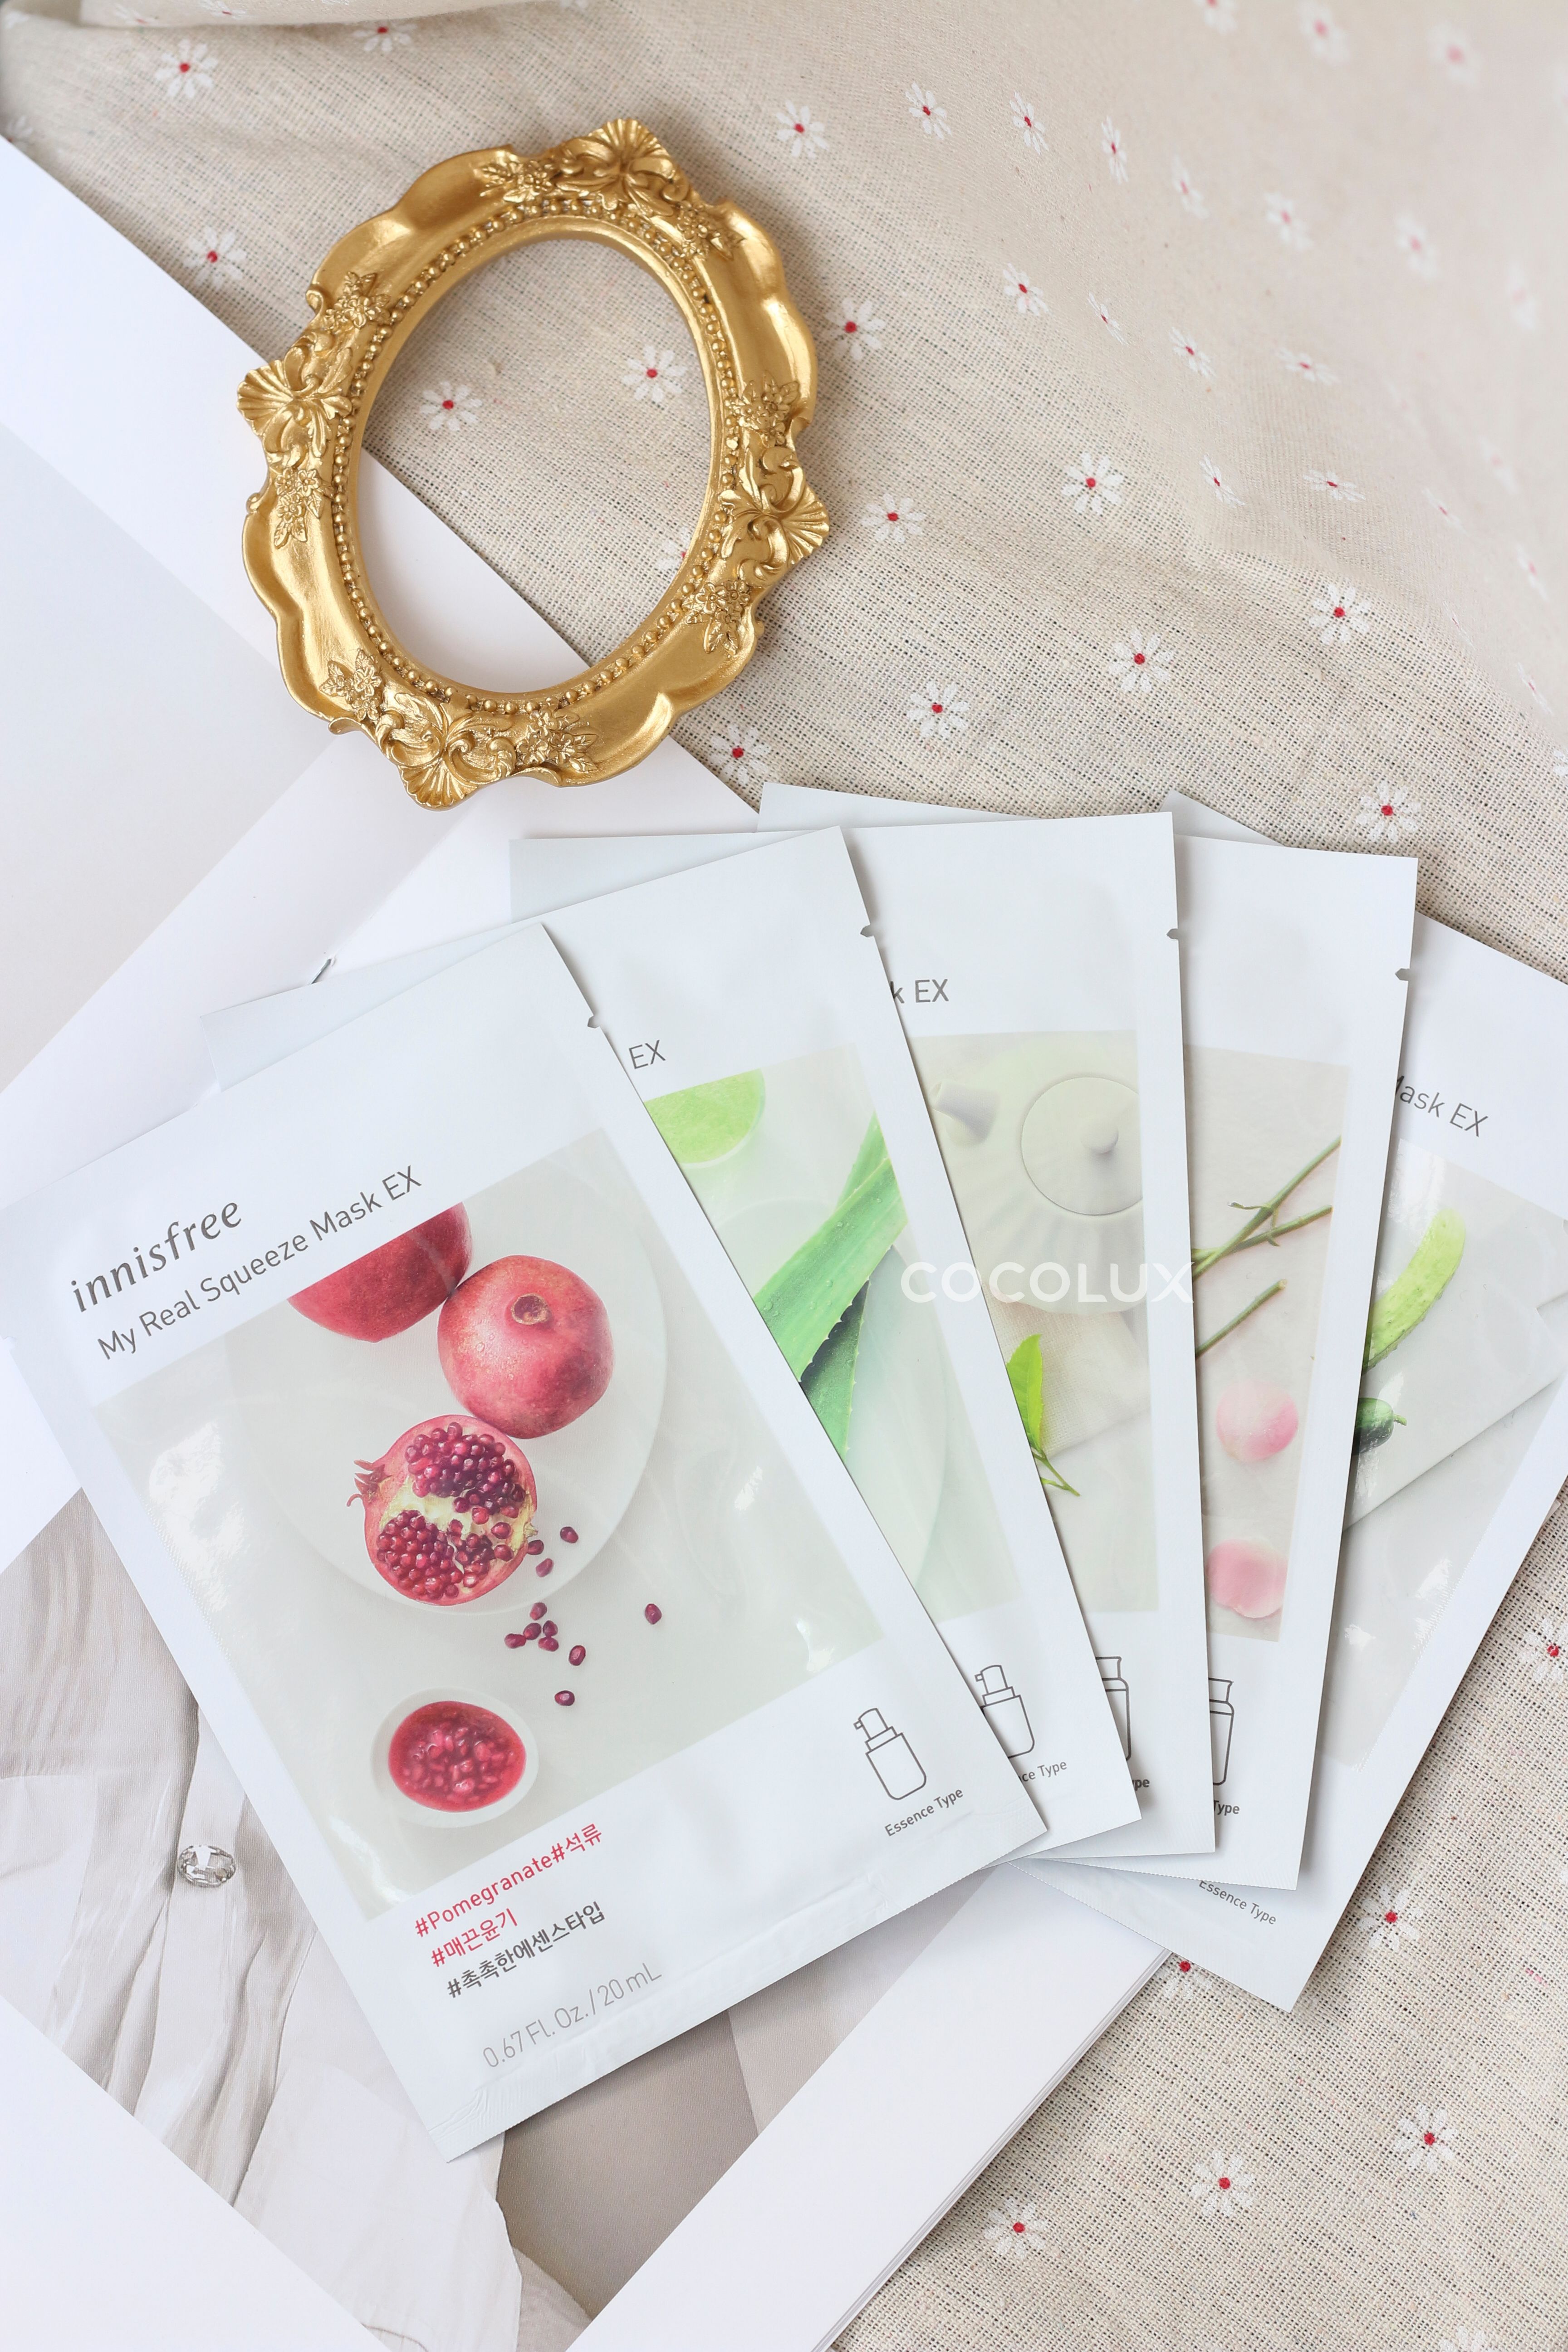 Mặt Nạ Innisfree My Real Squeeze Mask Dưa Leo 20ml (10 PCS)